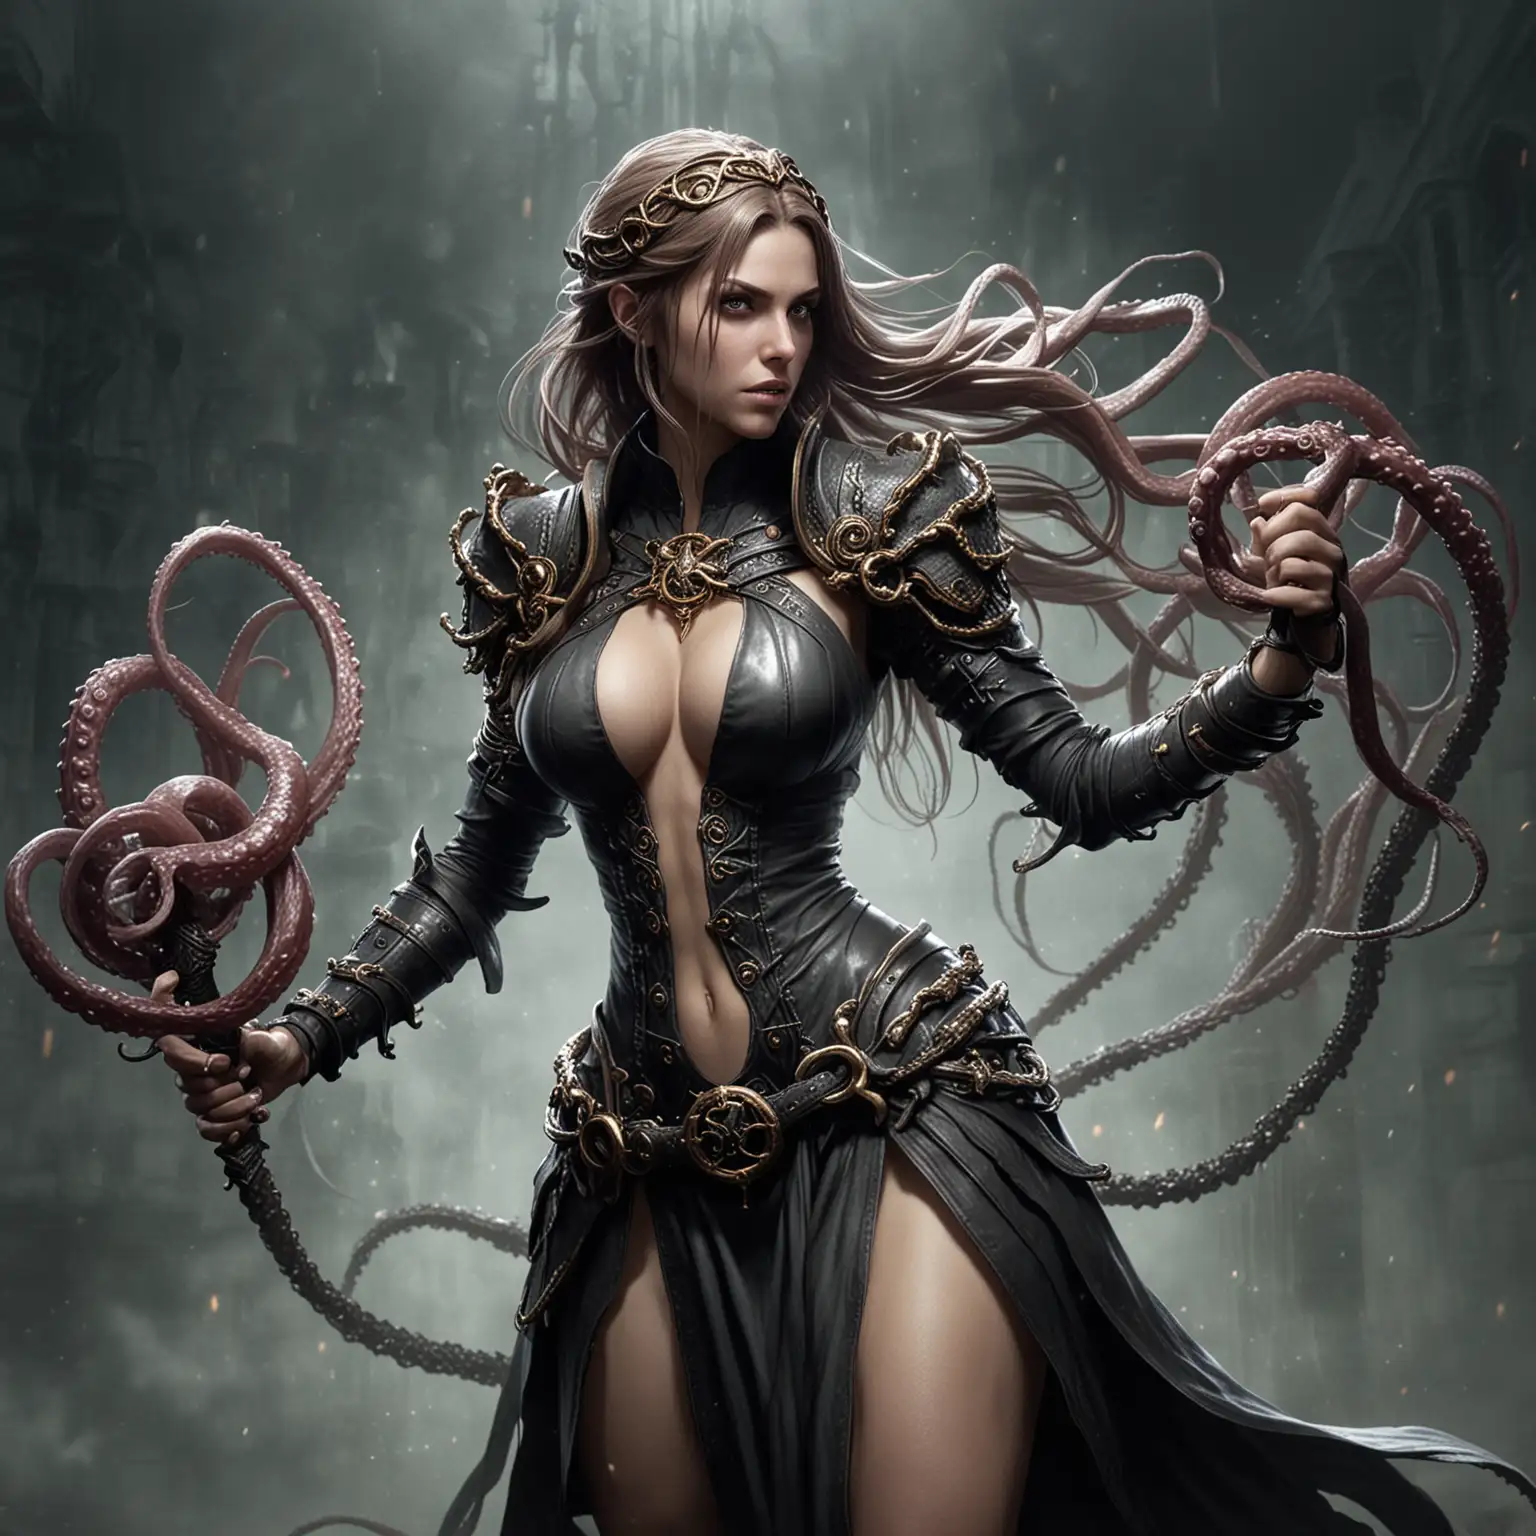 Elden Ring Boss Malenia Blafr of Miquella Confronts with Tentacles in Dark Souls Setting